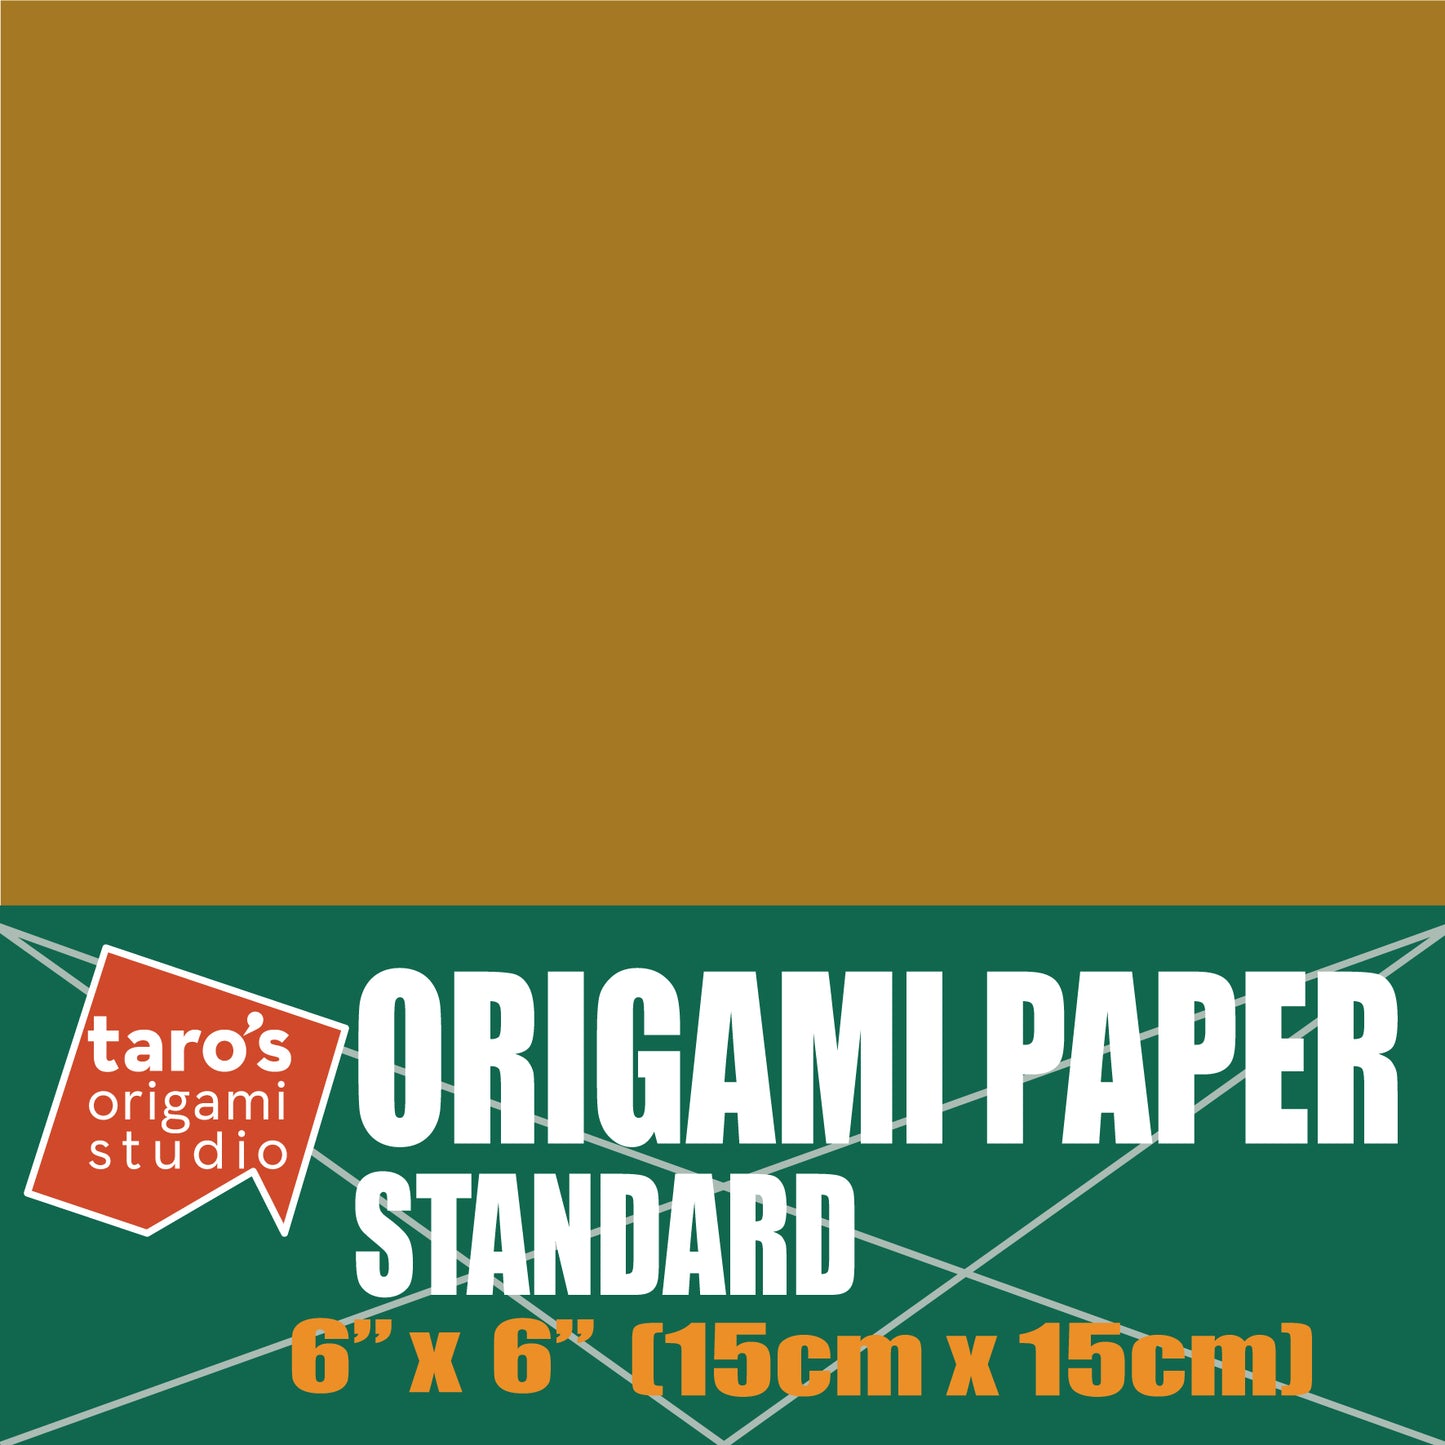 Standard 6 Inch One Sided Single Color (Ocher) 50 Sheets (All Same Color) Square Easy Fold Premium Japanese Paper for Beginner (Made in Japan)